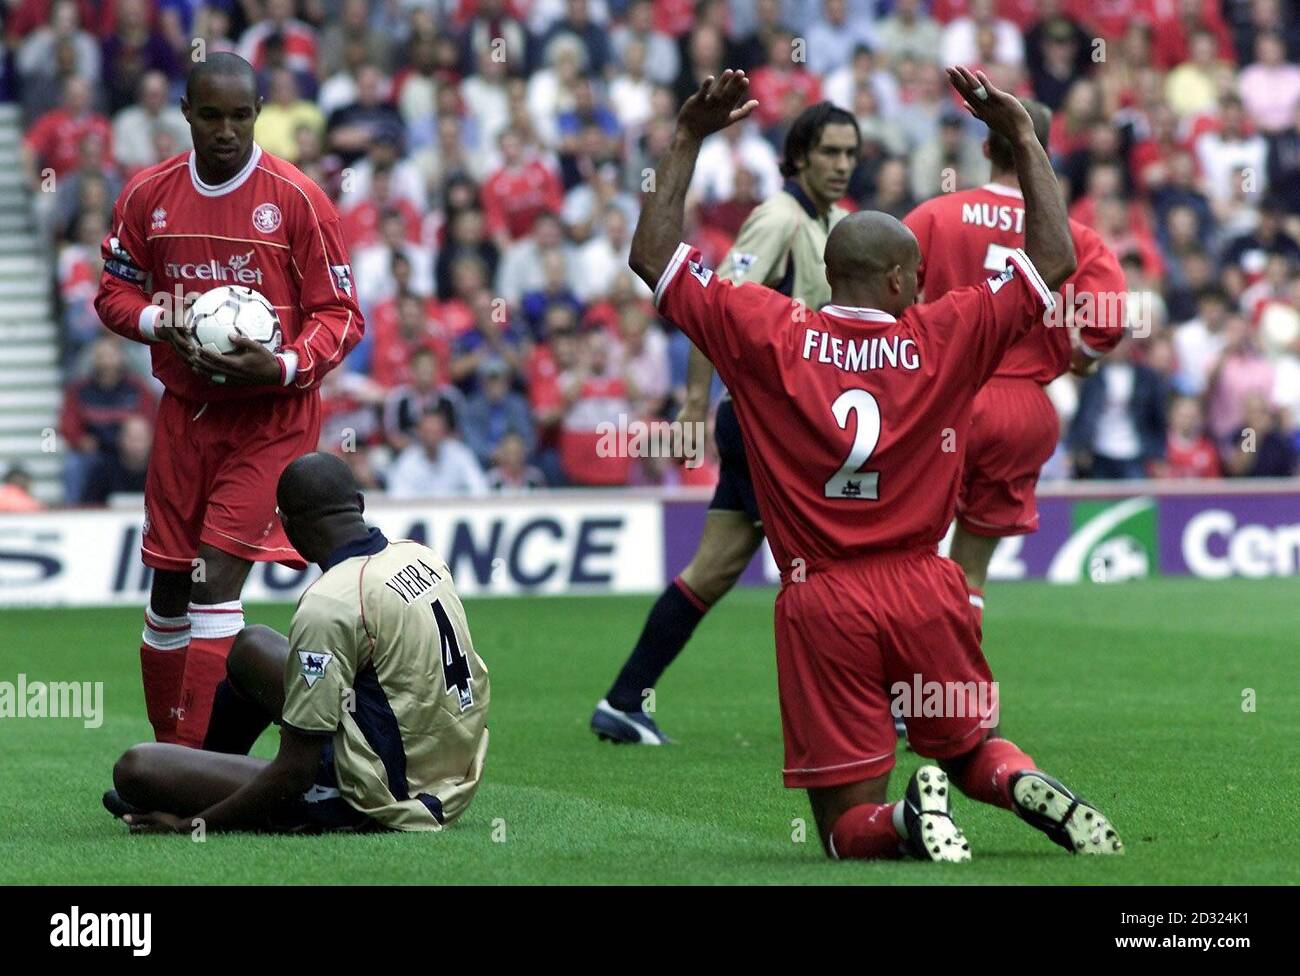 THIS PICTURE CAN ONLY BE USED WITHIN THE CONTEXT OF AN EDITORIAL FEATURE. NO WEBSITE/INTERNET USE OF PREMIERSHIP MATERIAL UNLESS SITE IS REGISTERED WITH FOOTBALL ASSOCIATION PREMIER LEAGUE. Middlesbrough's Paul Ince and Curtis Fleming appeal for a freekick from Arsenal's Patrick Vieira during the FA Barclaycard Premiership game at the Riverside Stadium. Stock Photo